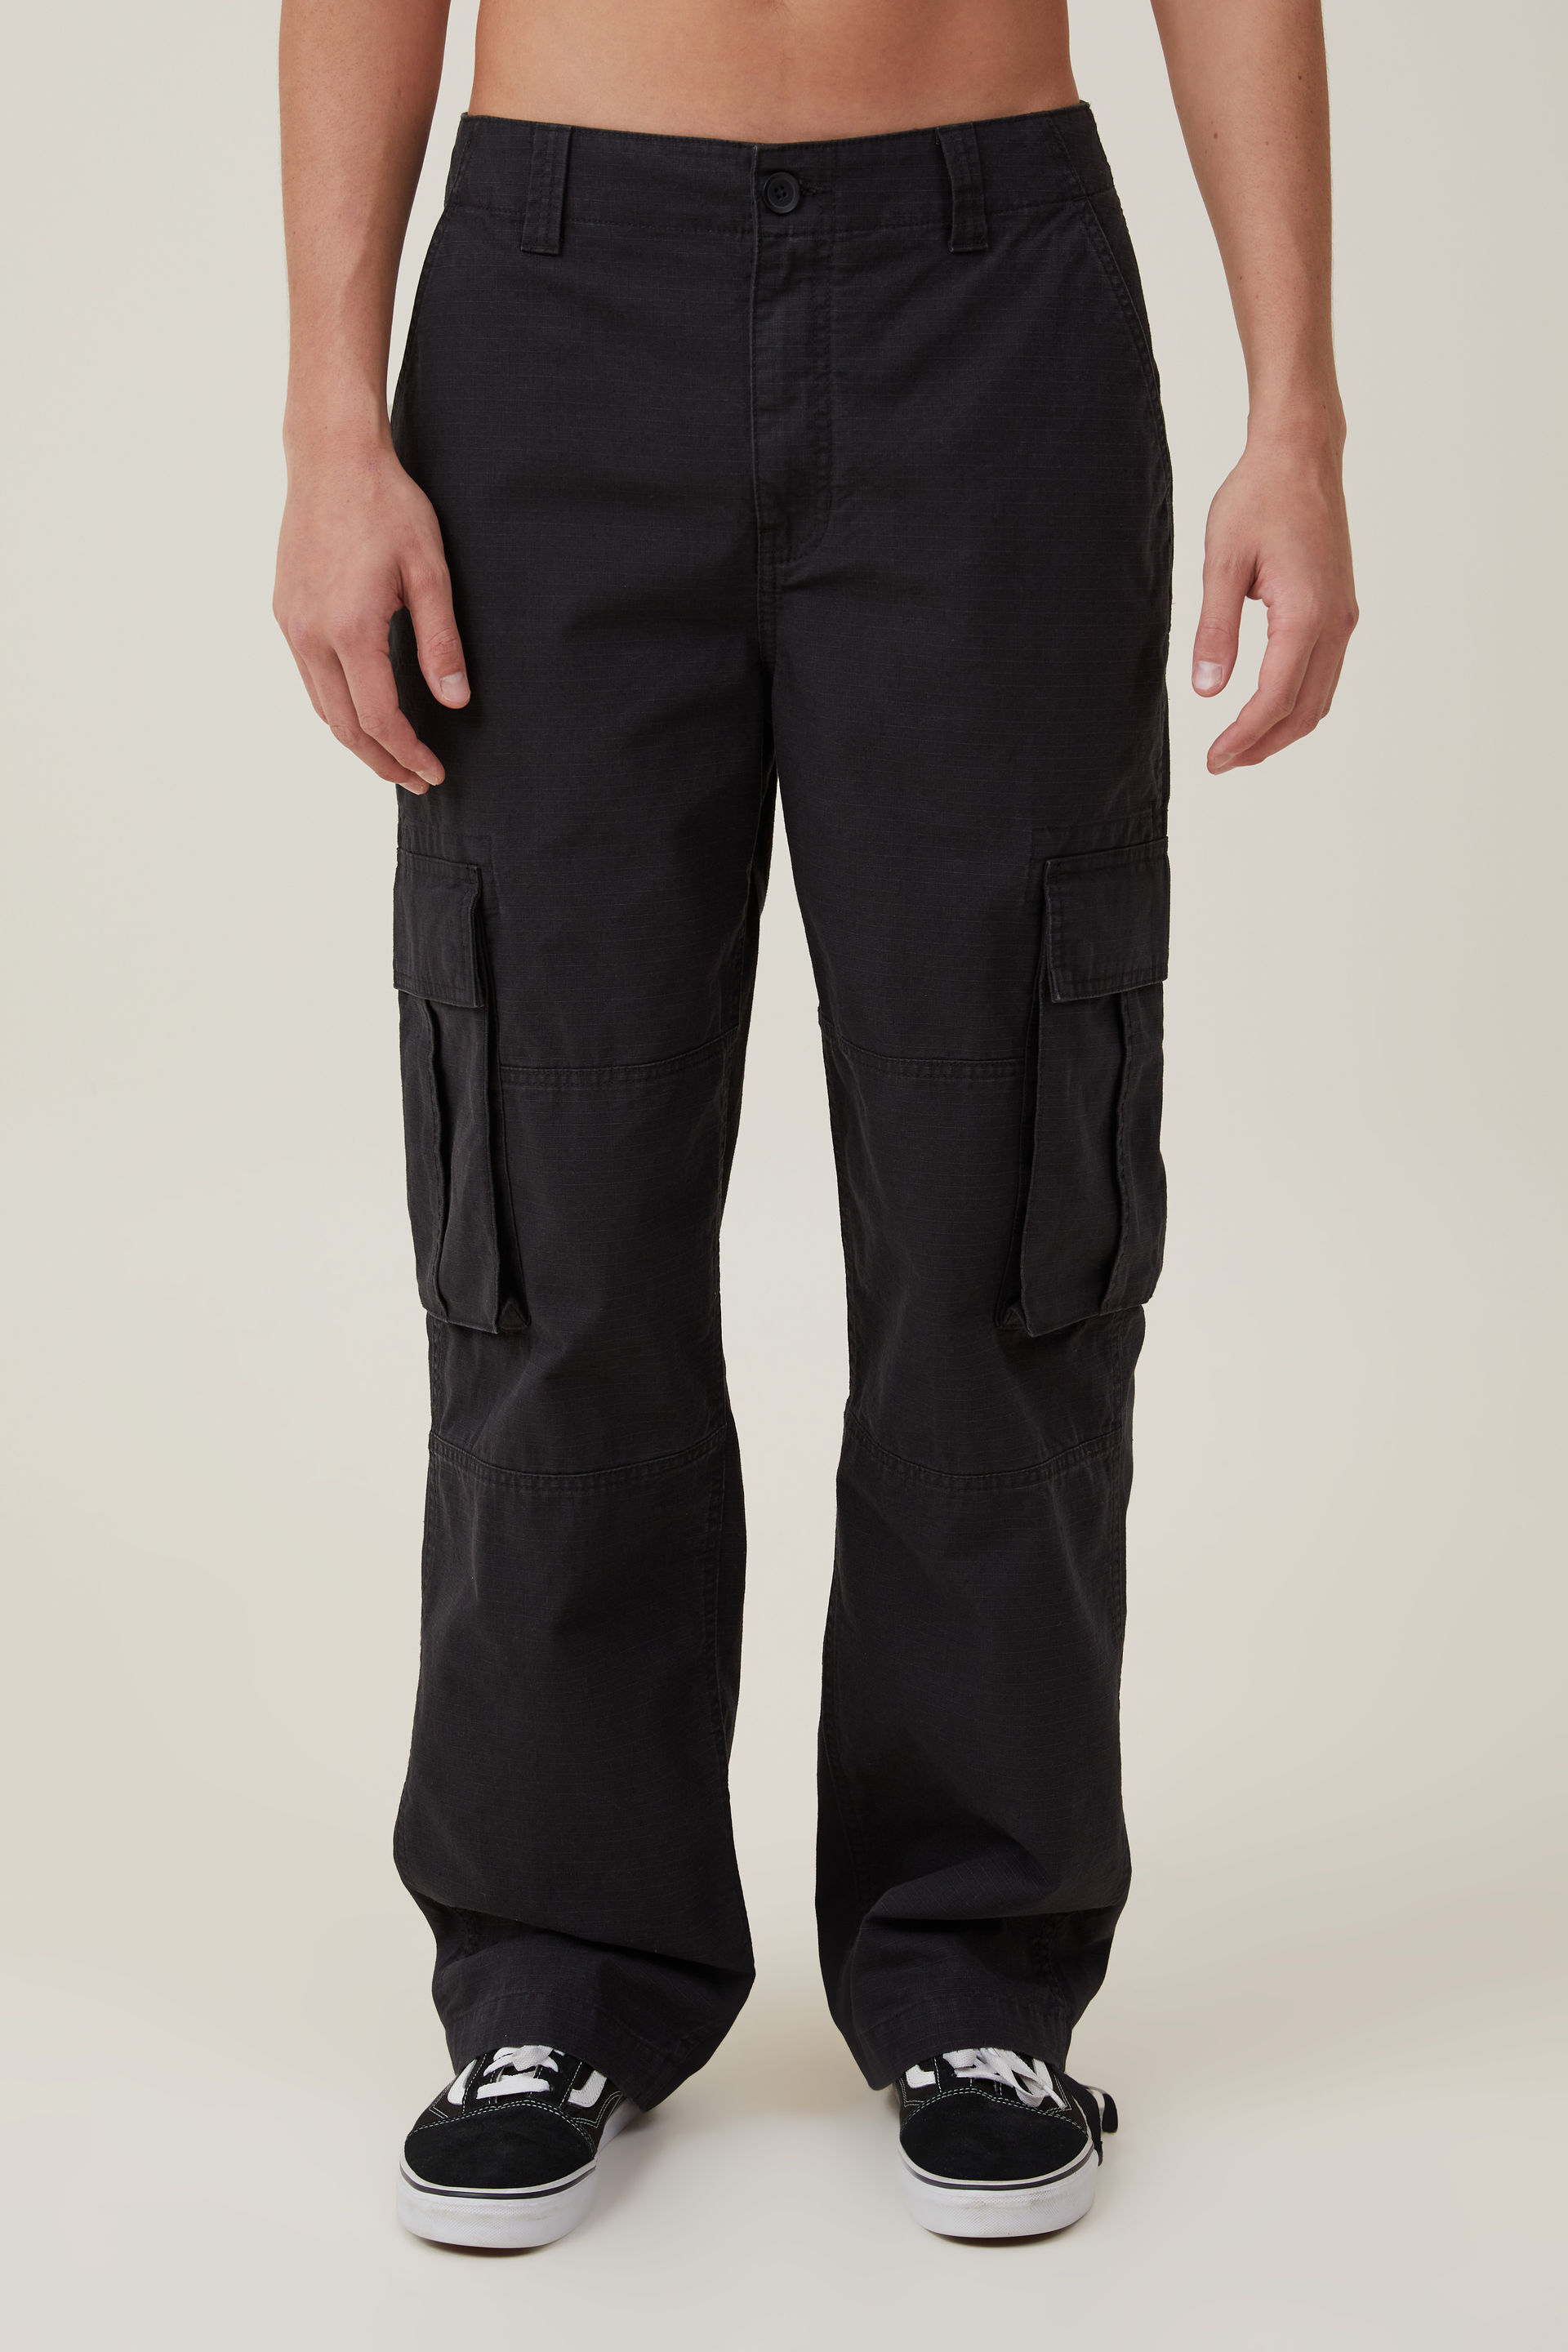 LEVI'S Men's Stay Loose Cargo Pants Pirate Black Twill - Central.co.th